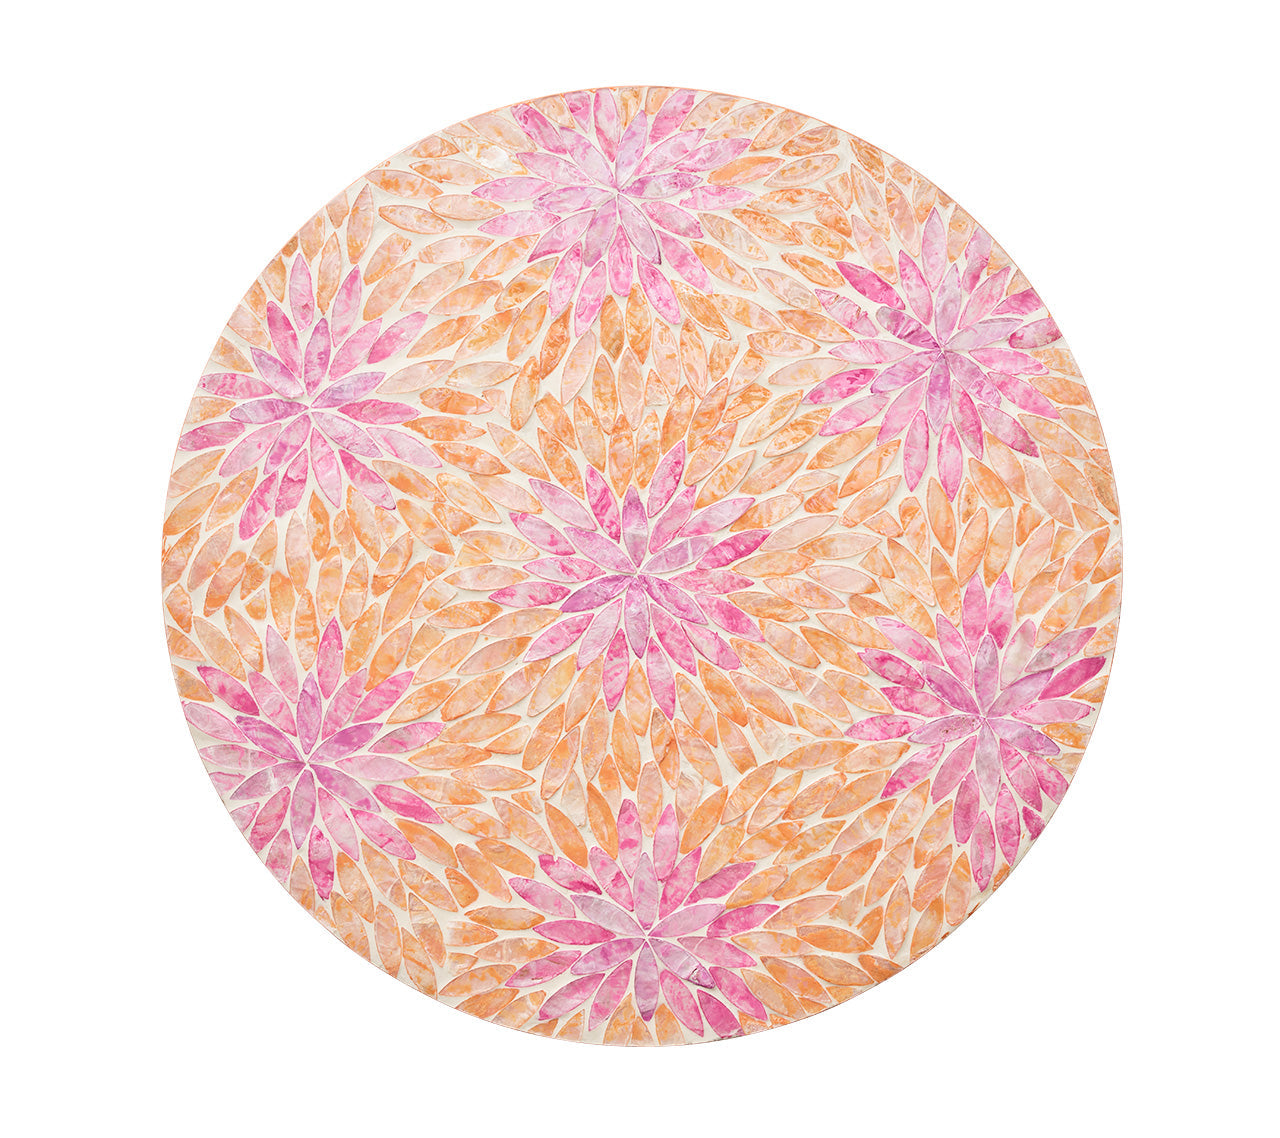 Round Flora Placemat with pink and orange Capiz shells arranged to resemble petals of a spring flower. 